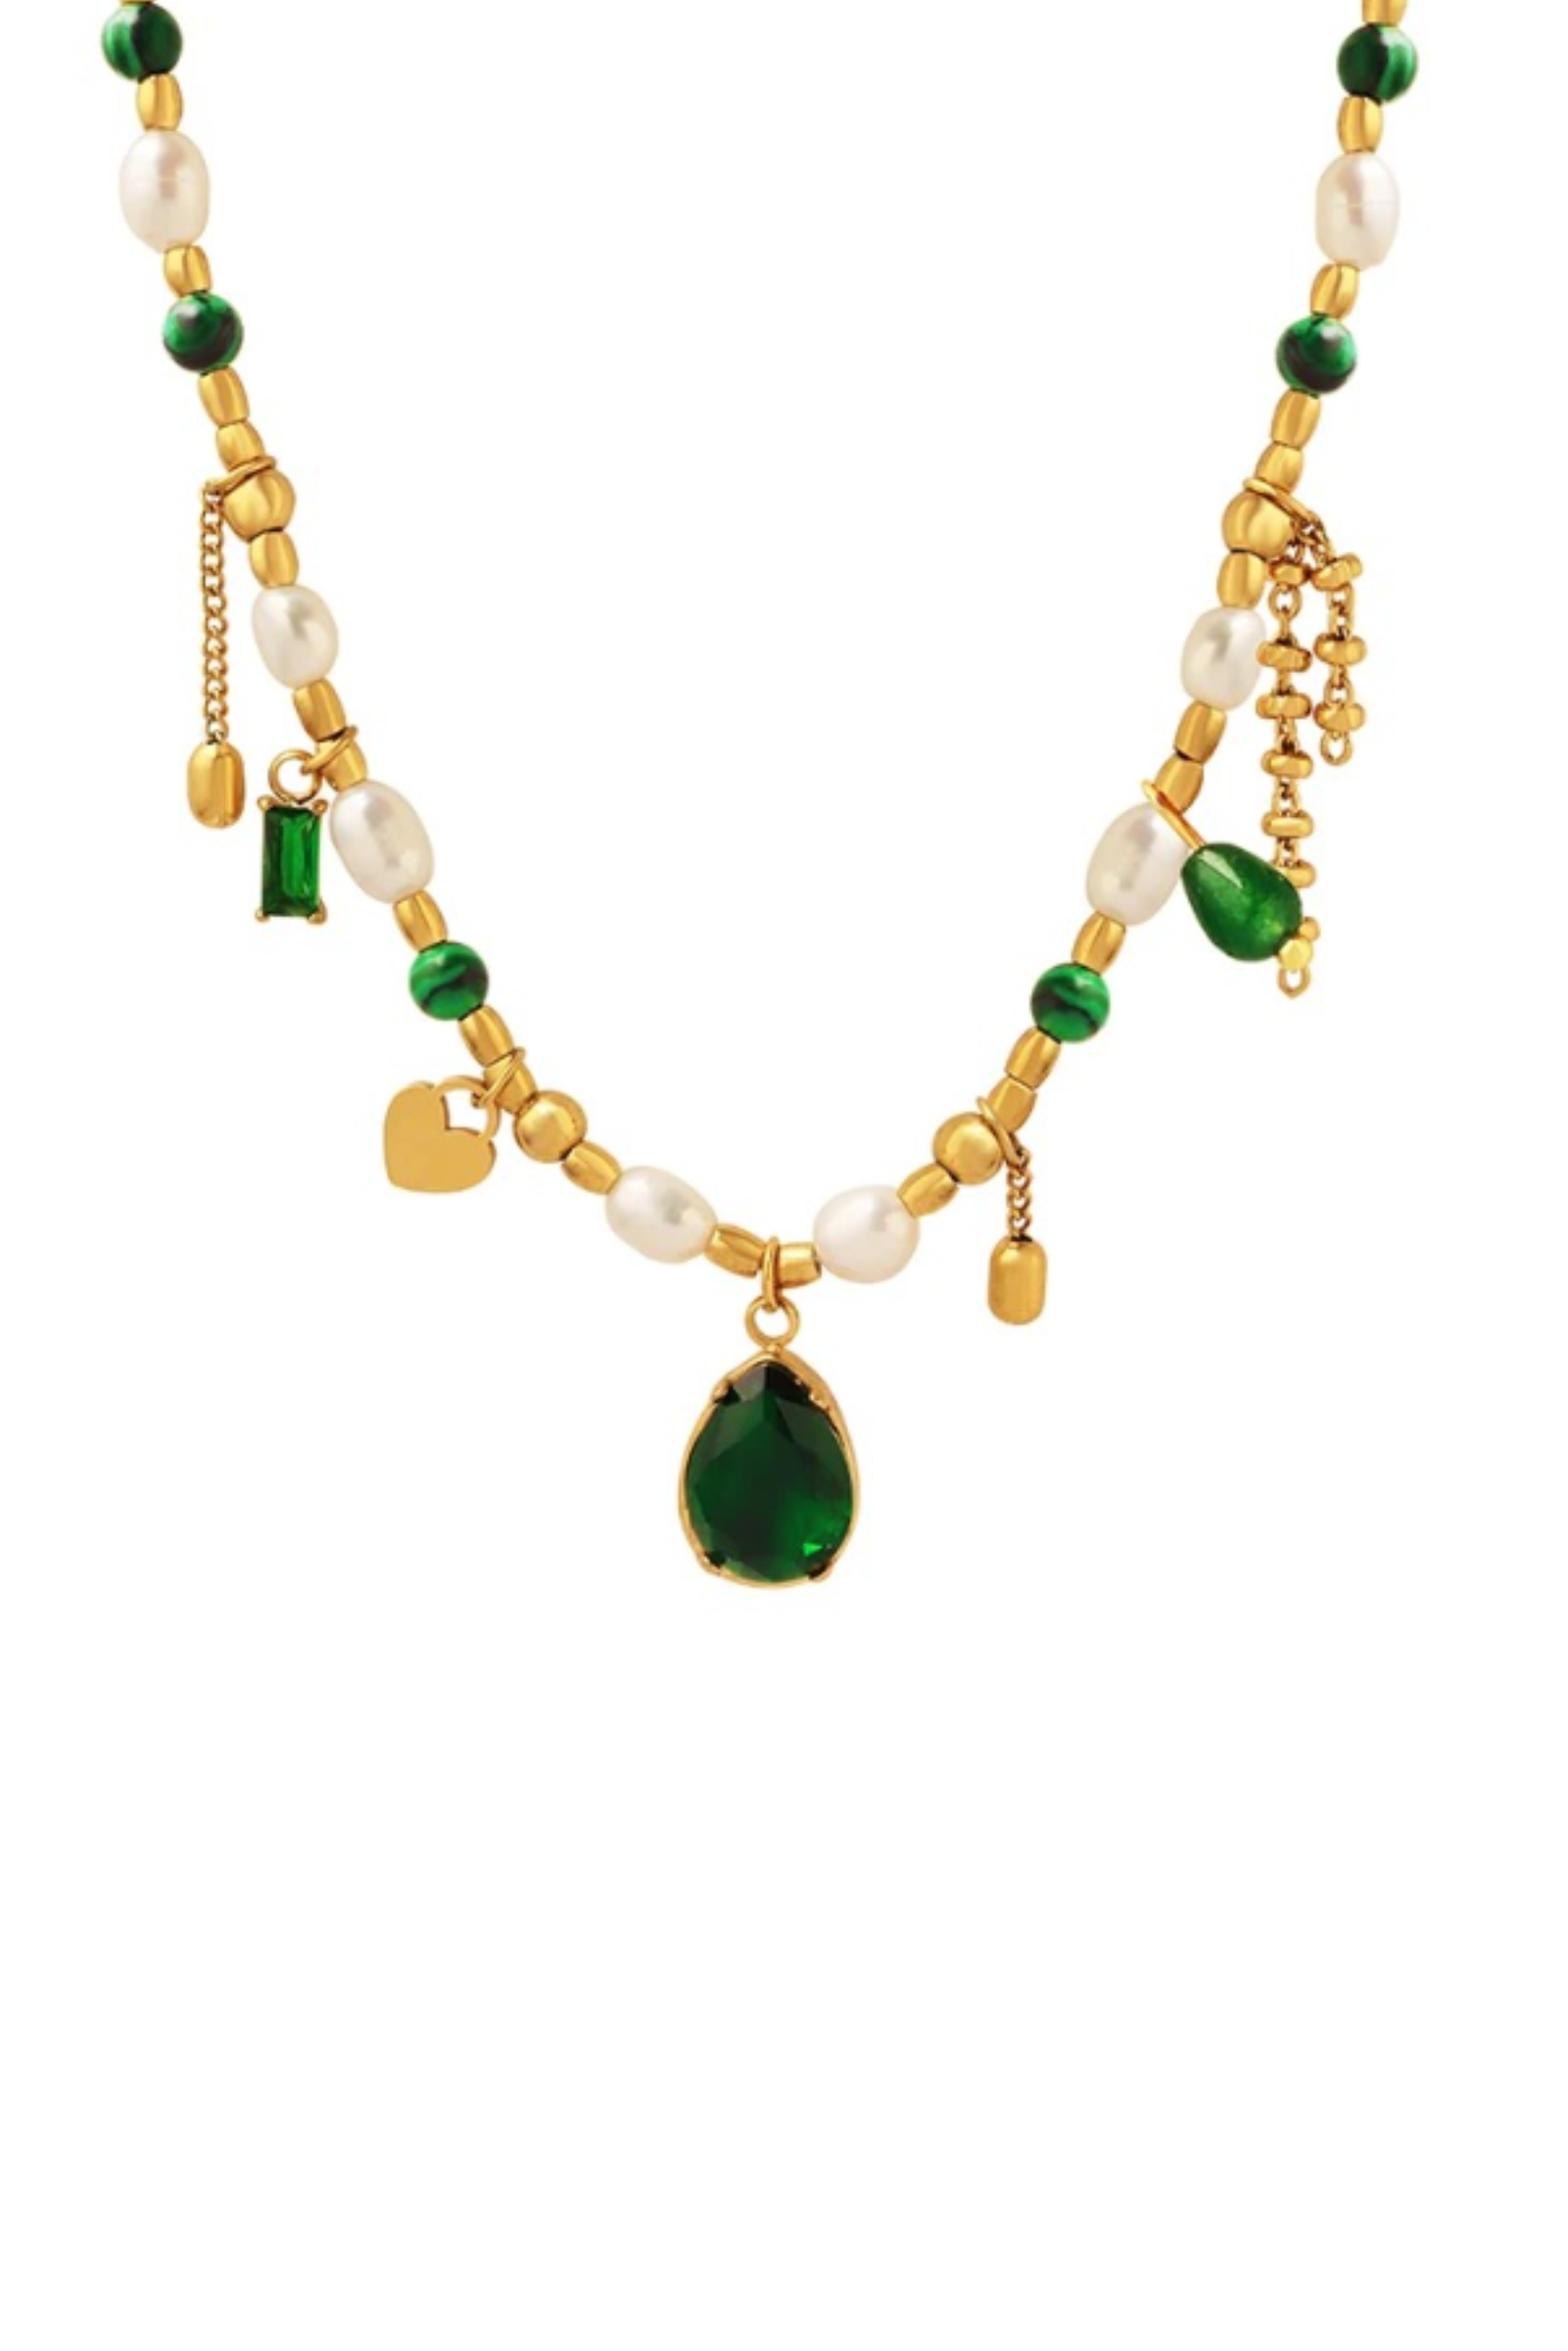 Charm Me Up Necklace - Emerald Green